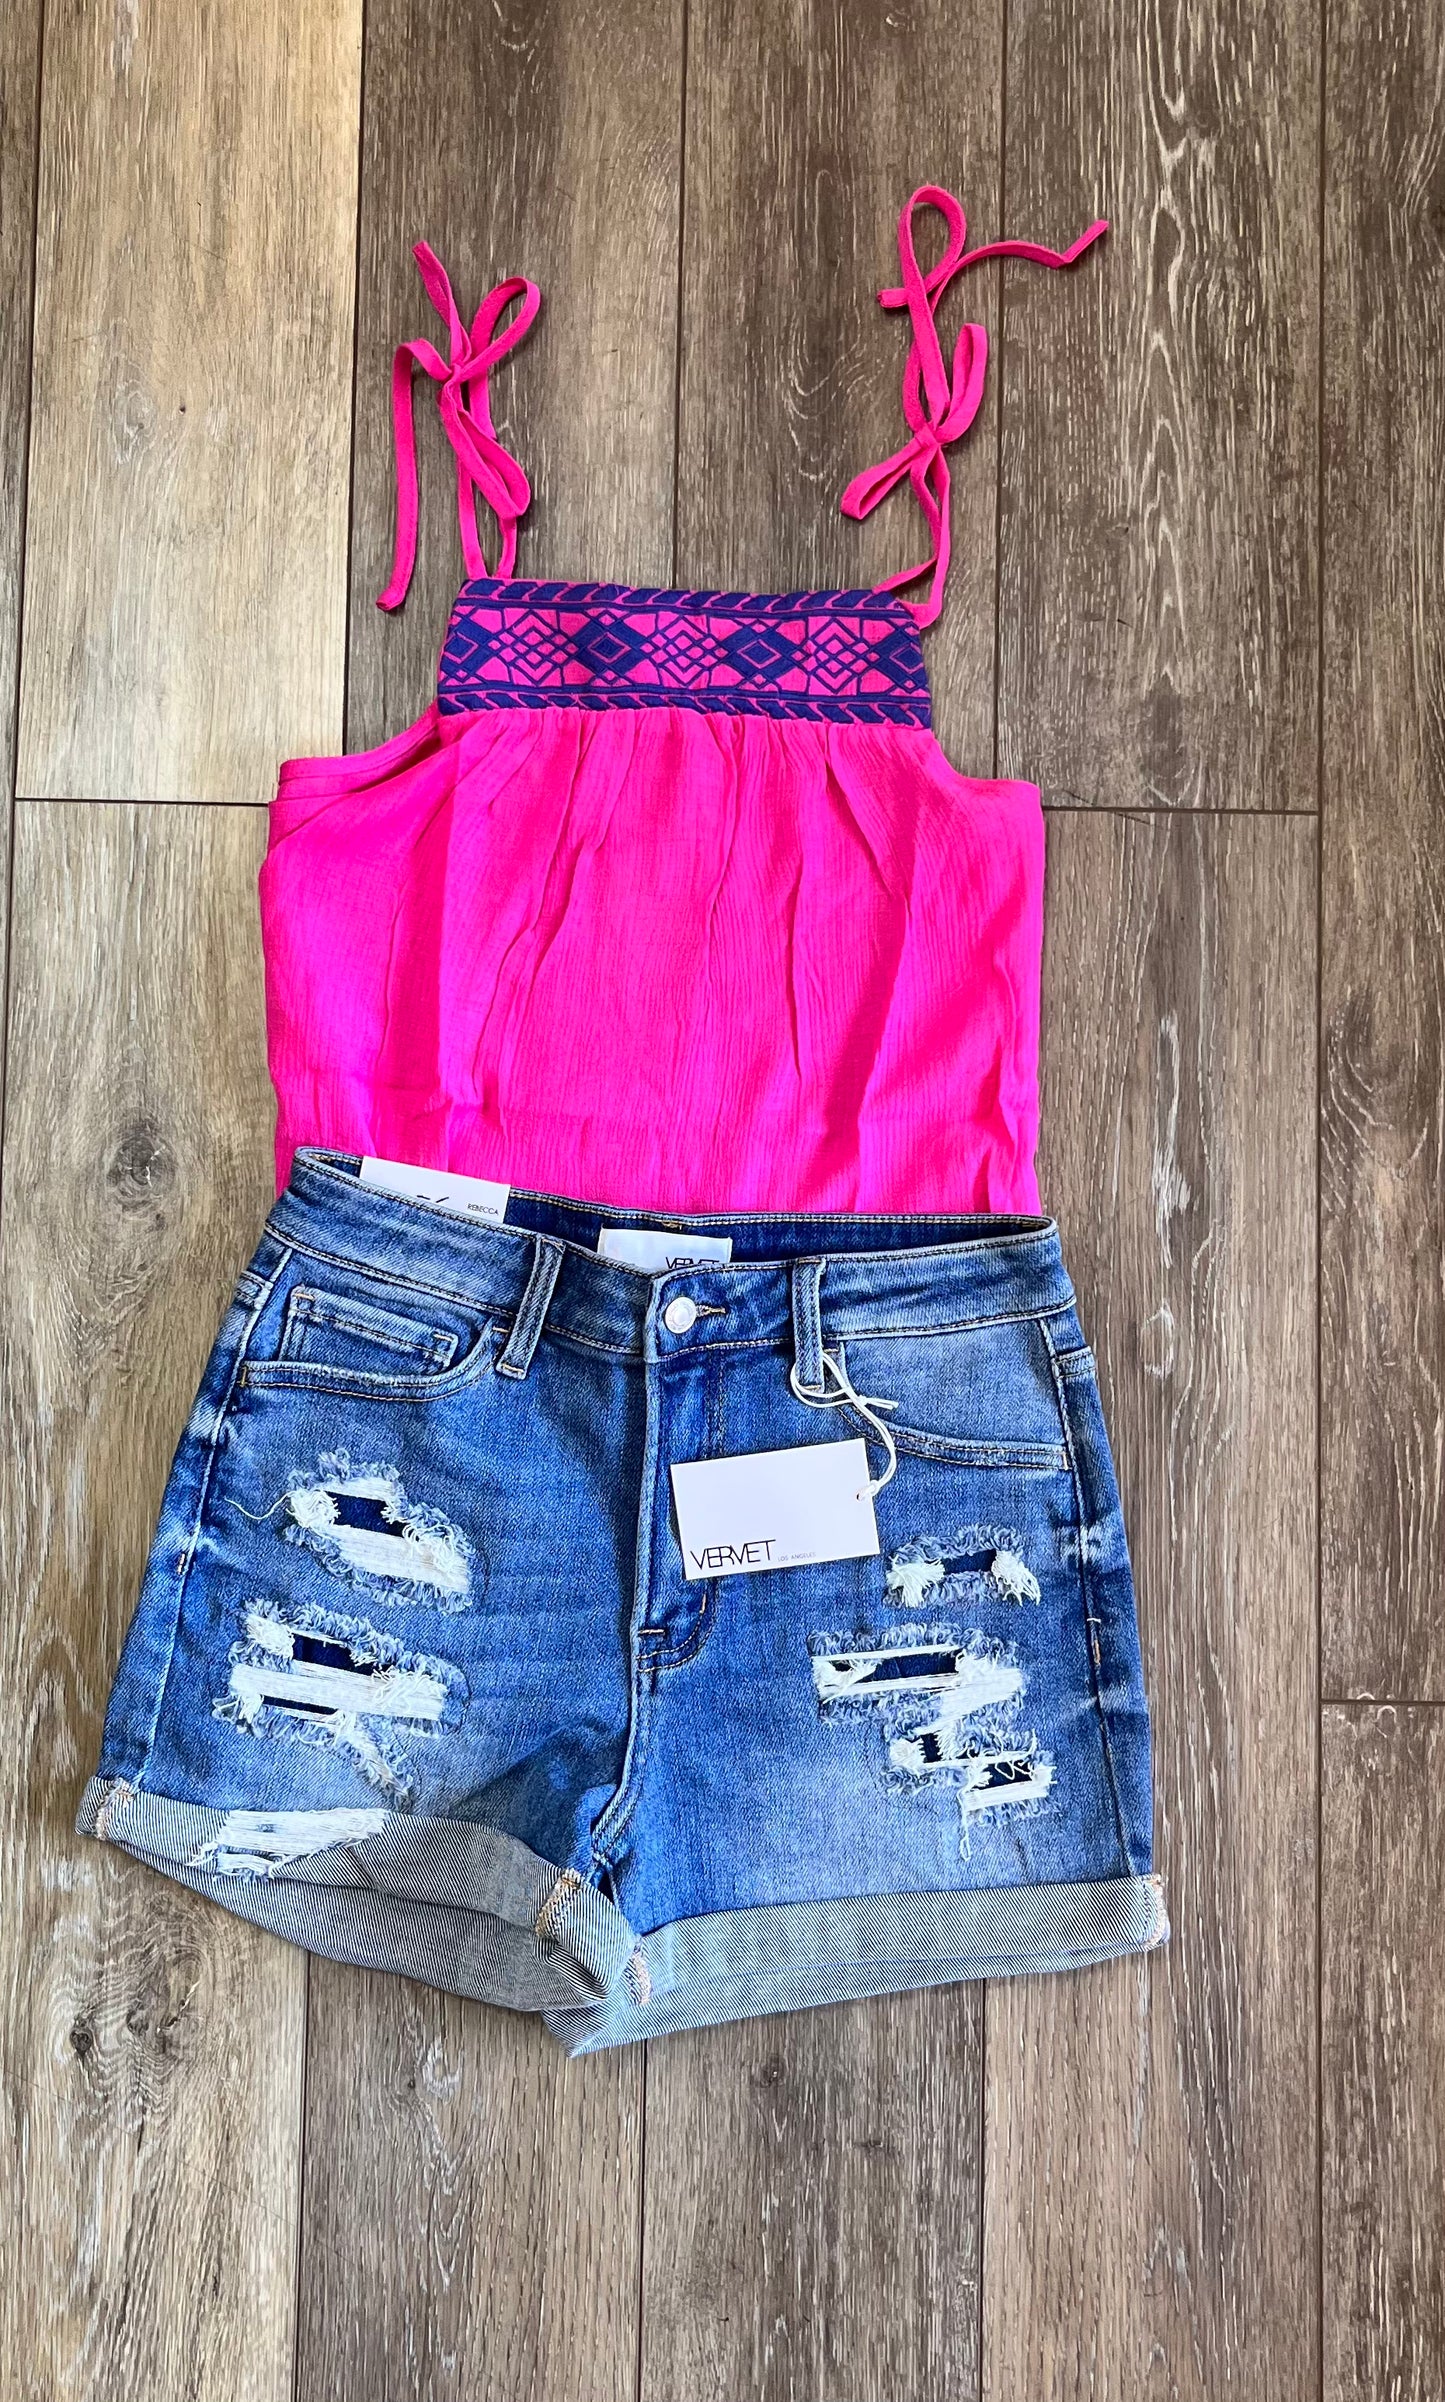 Hot Pink Embroidered Cami was $24.90